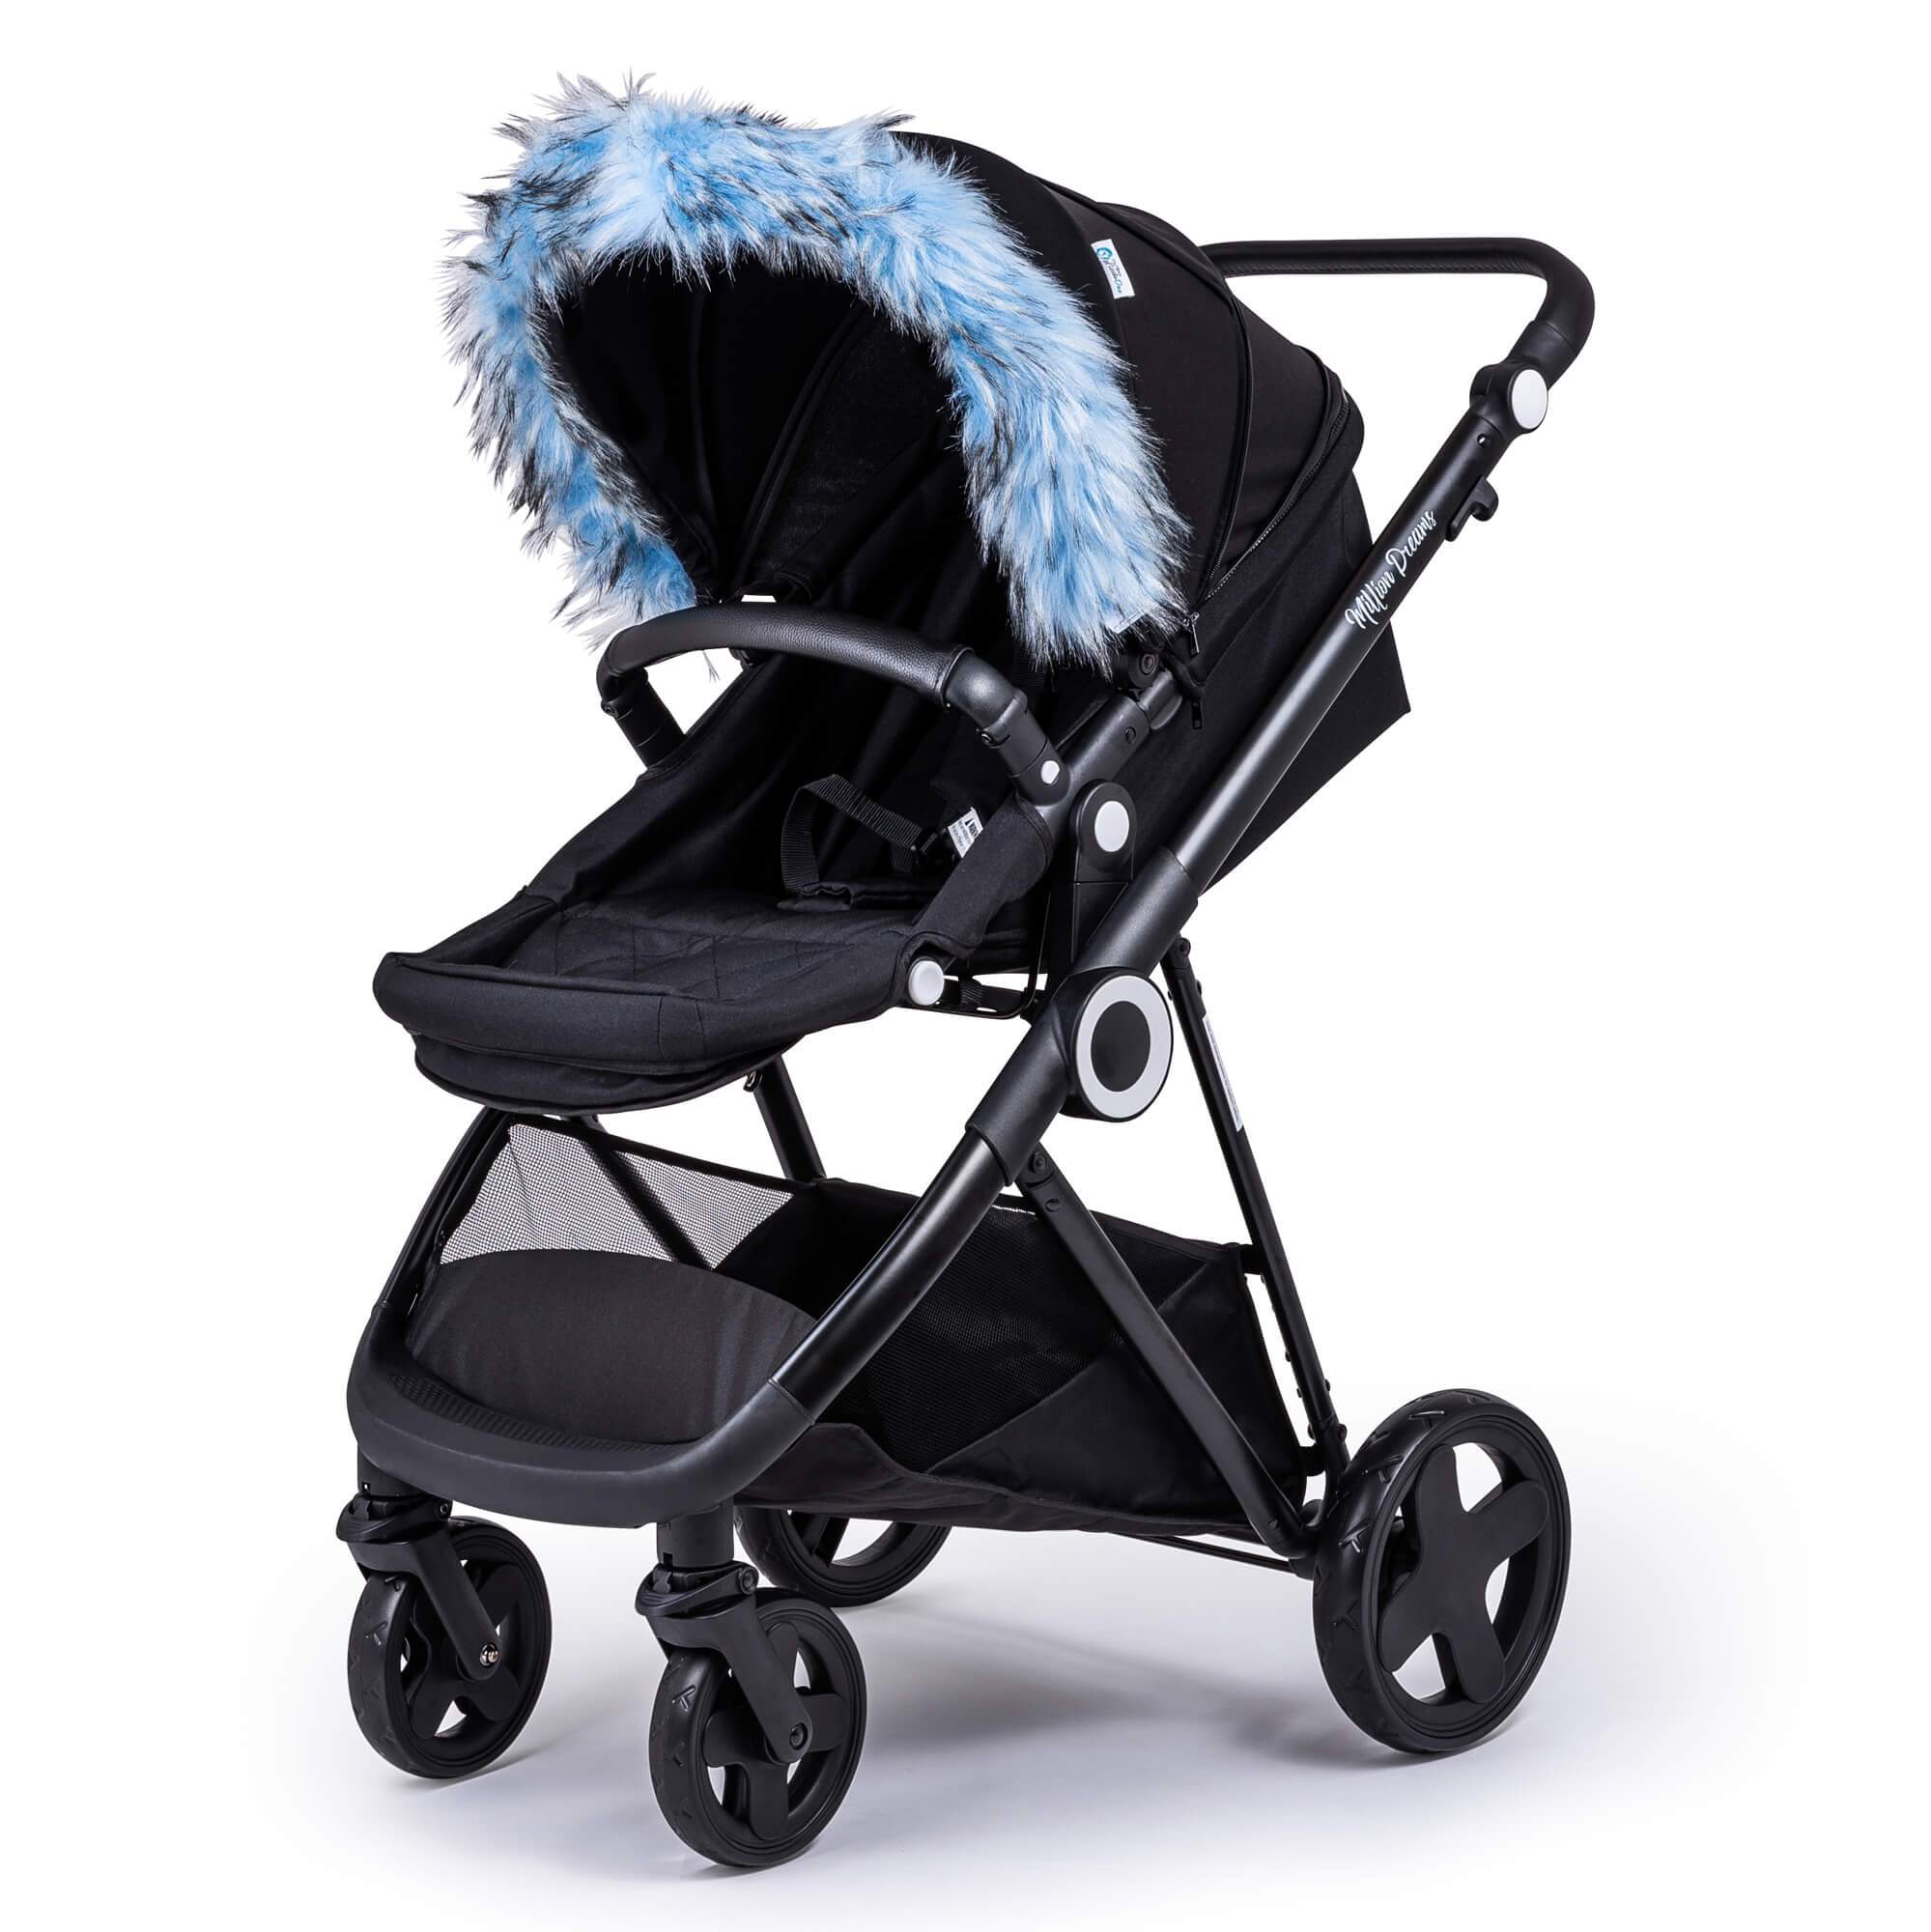 Pram Fur Hood Trim Attachment for Pushchair Compatible with Bebe Confort - Light Blue / Fits All Models | For Your Little One